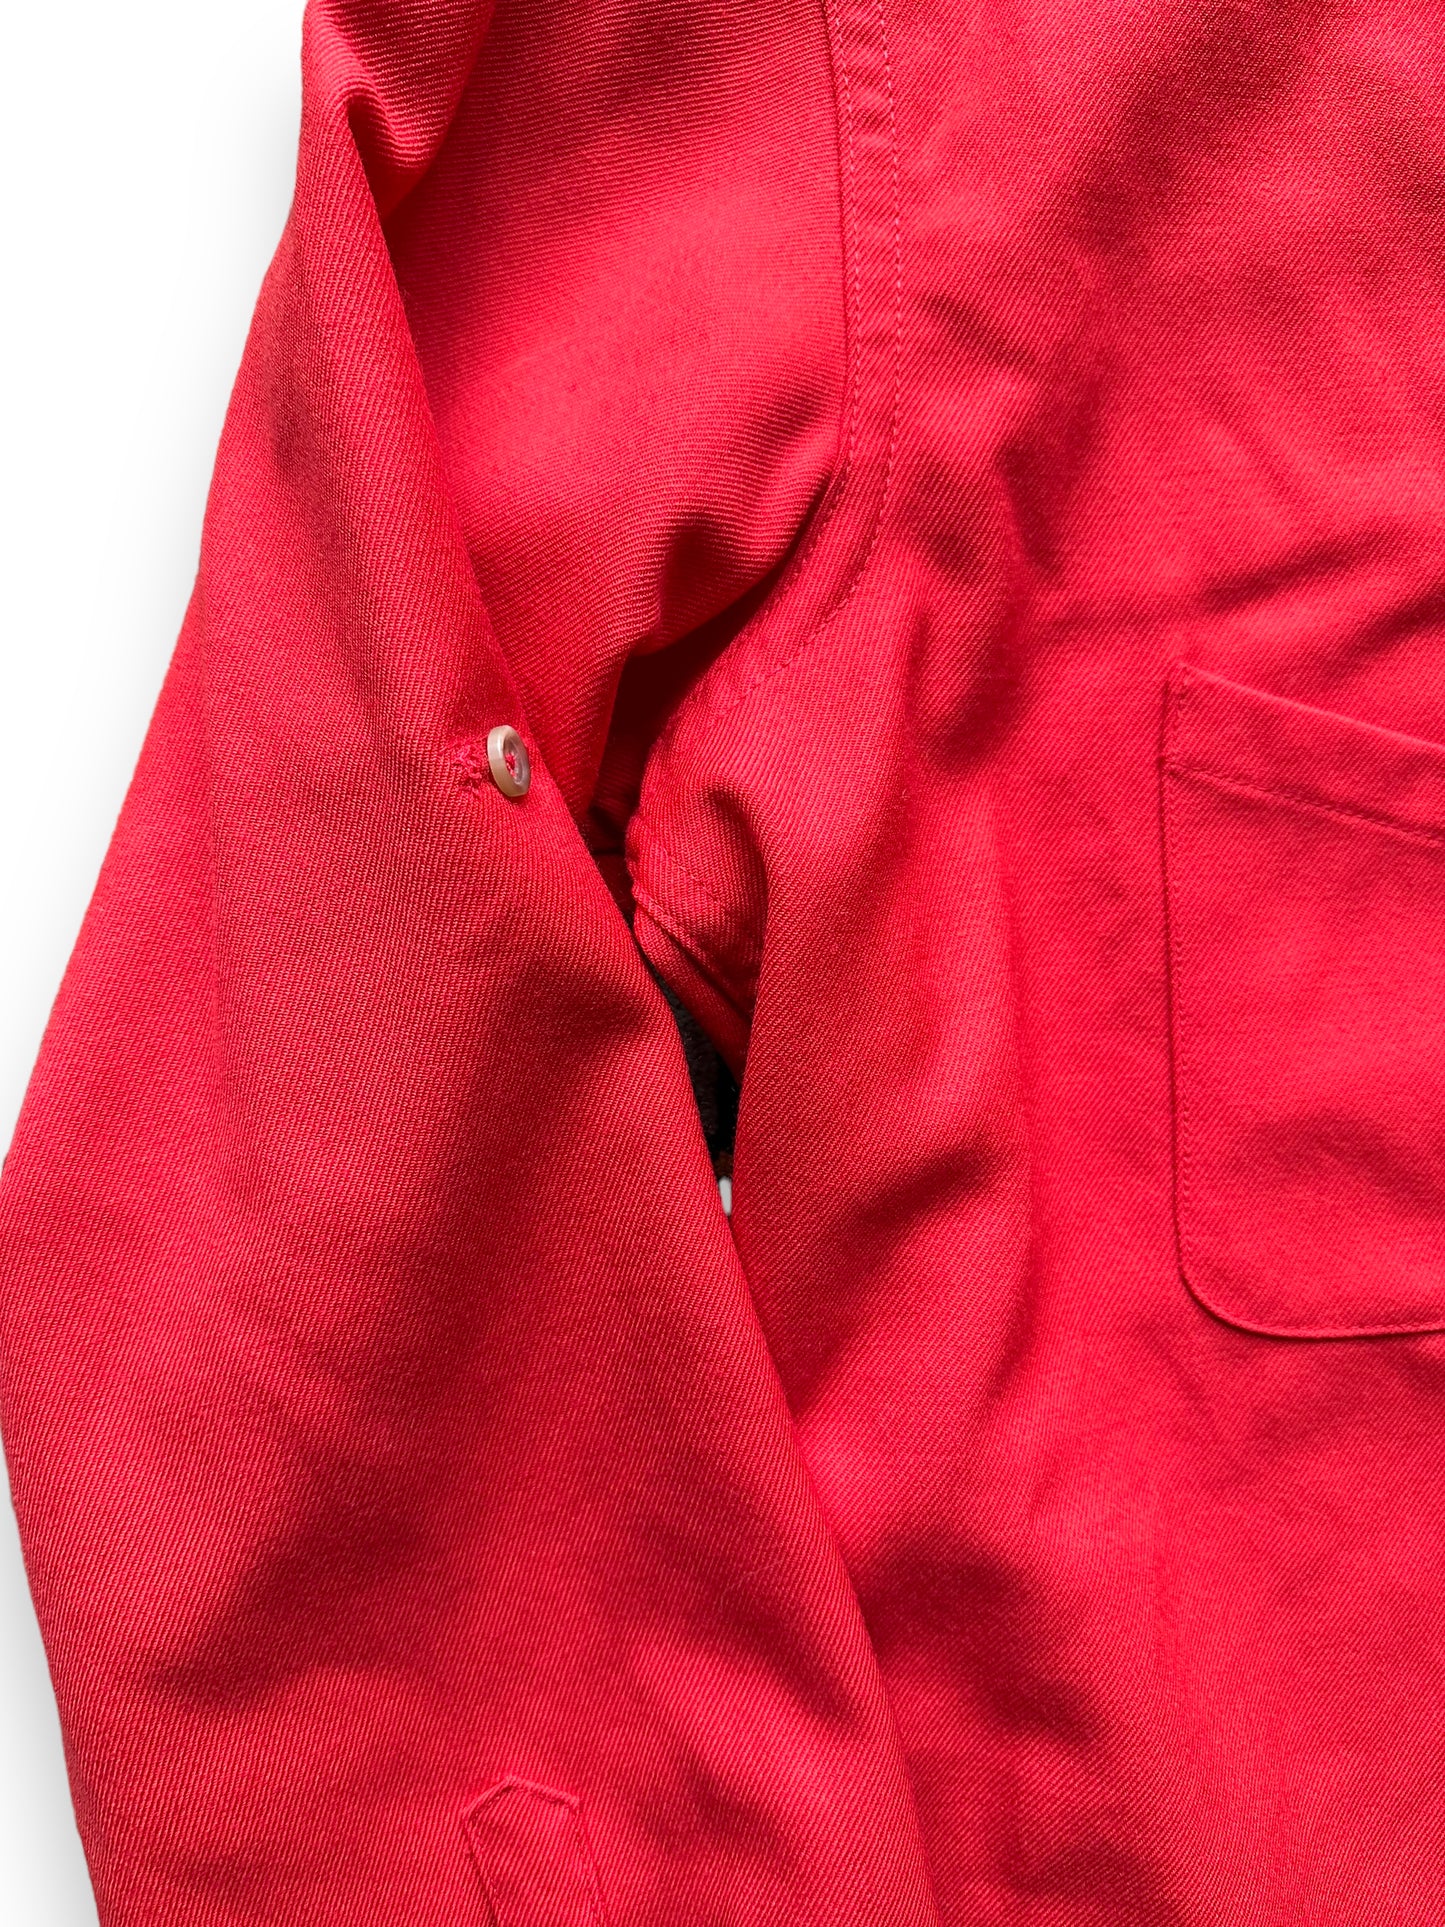 sleeve and spare button on Filson Merino Wool Red Scout Shirt |  Barn Owl Vintage Goods | Vintage Filson Workwear Seattle